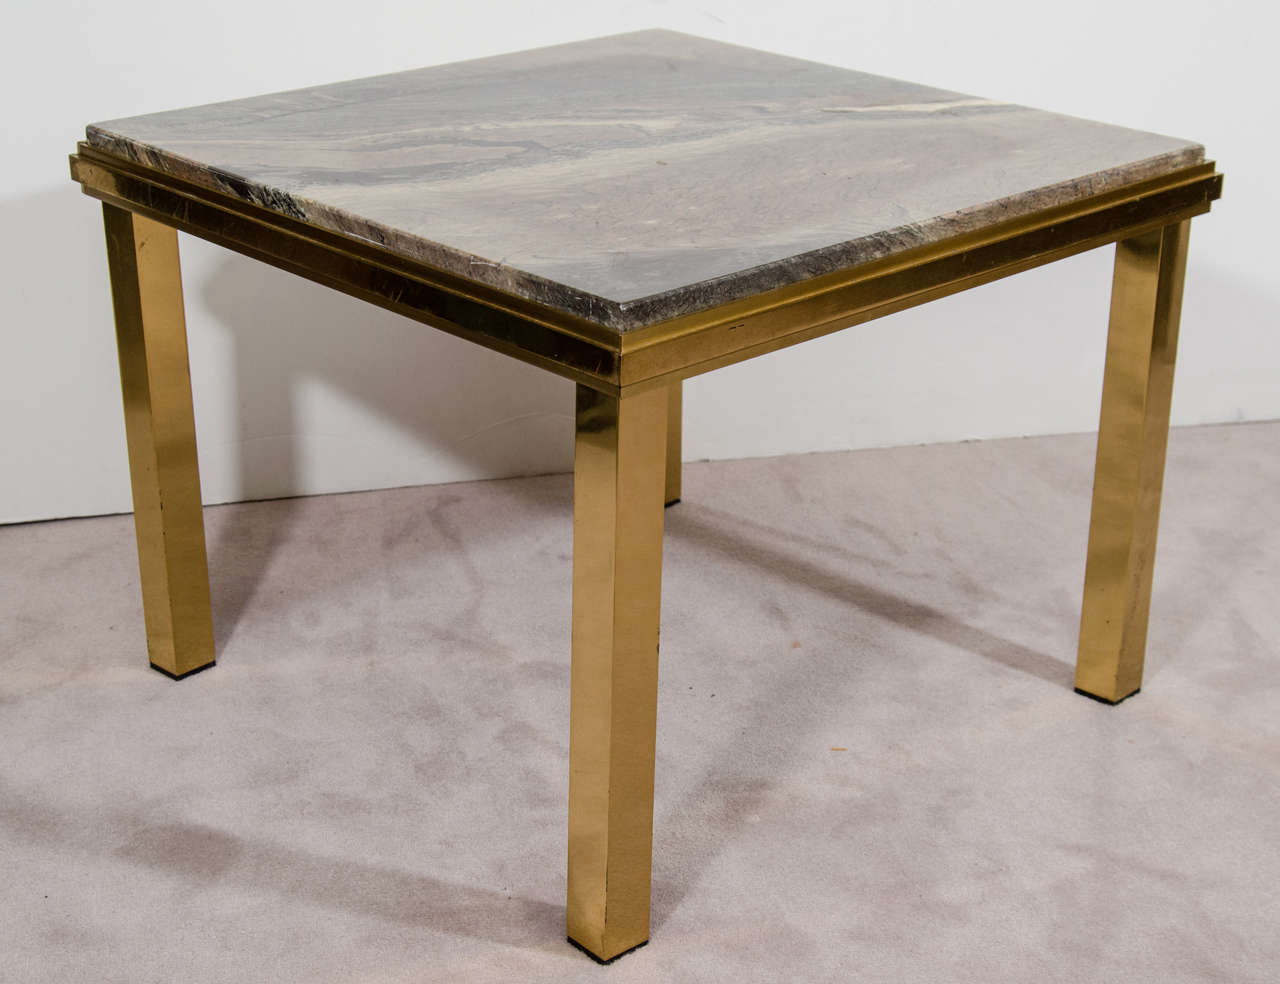 Italian Modern Brass and Marble End Table Willy Rizzo Style, circa 1970s For Sale 11